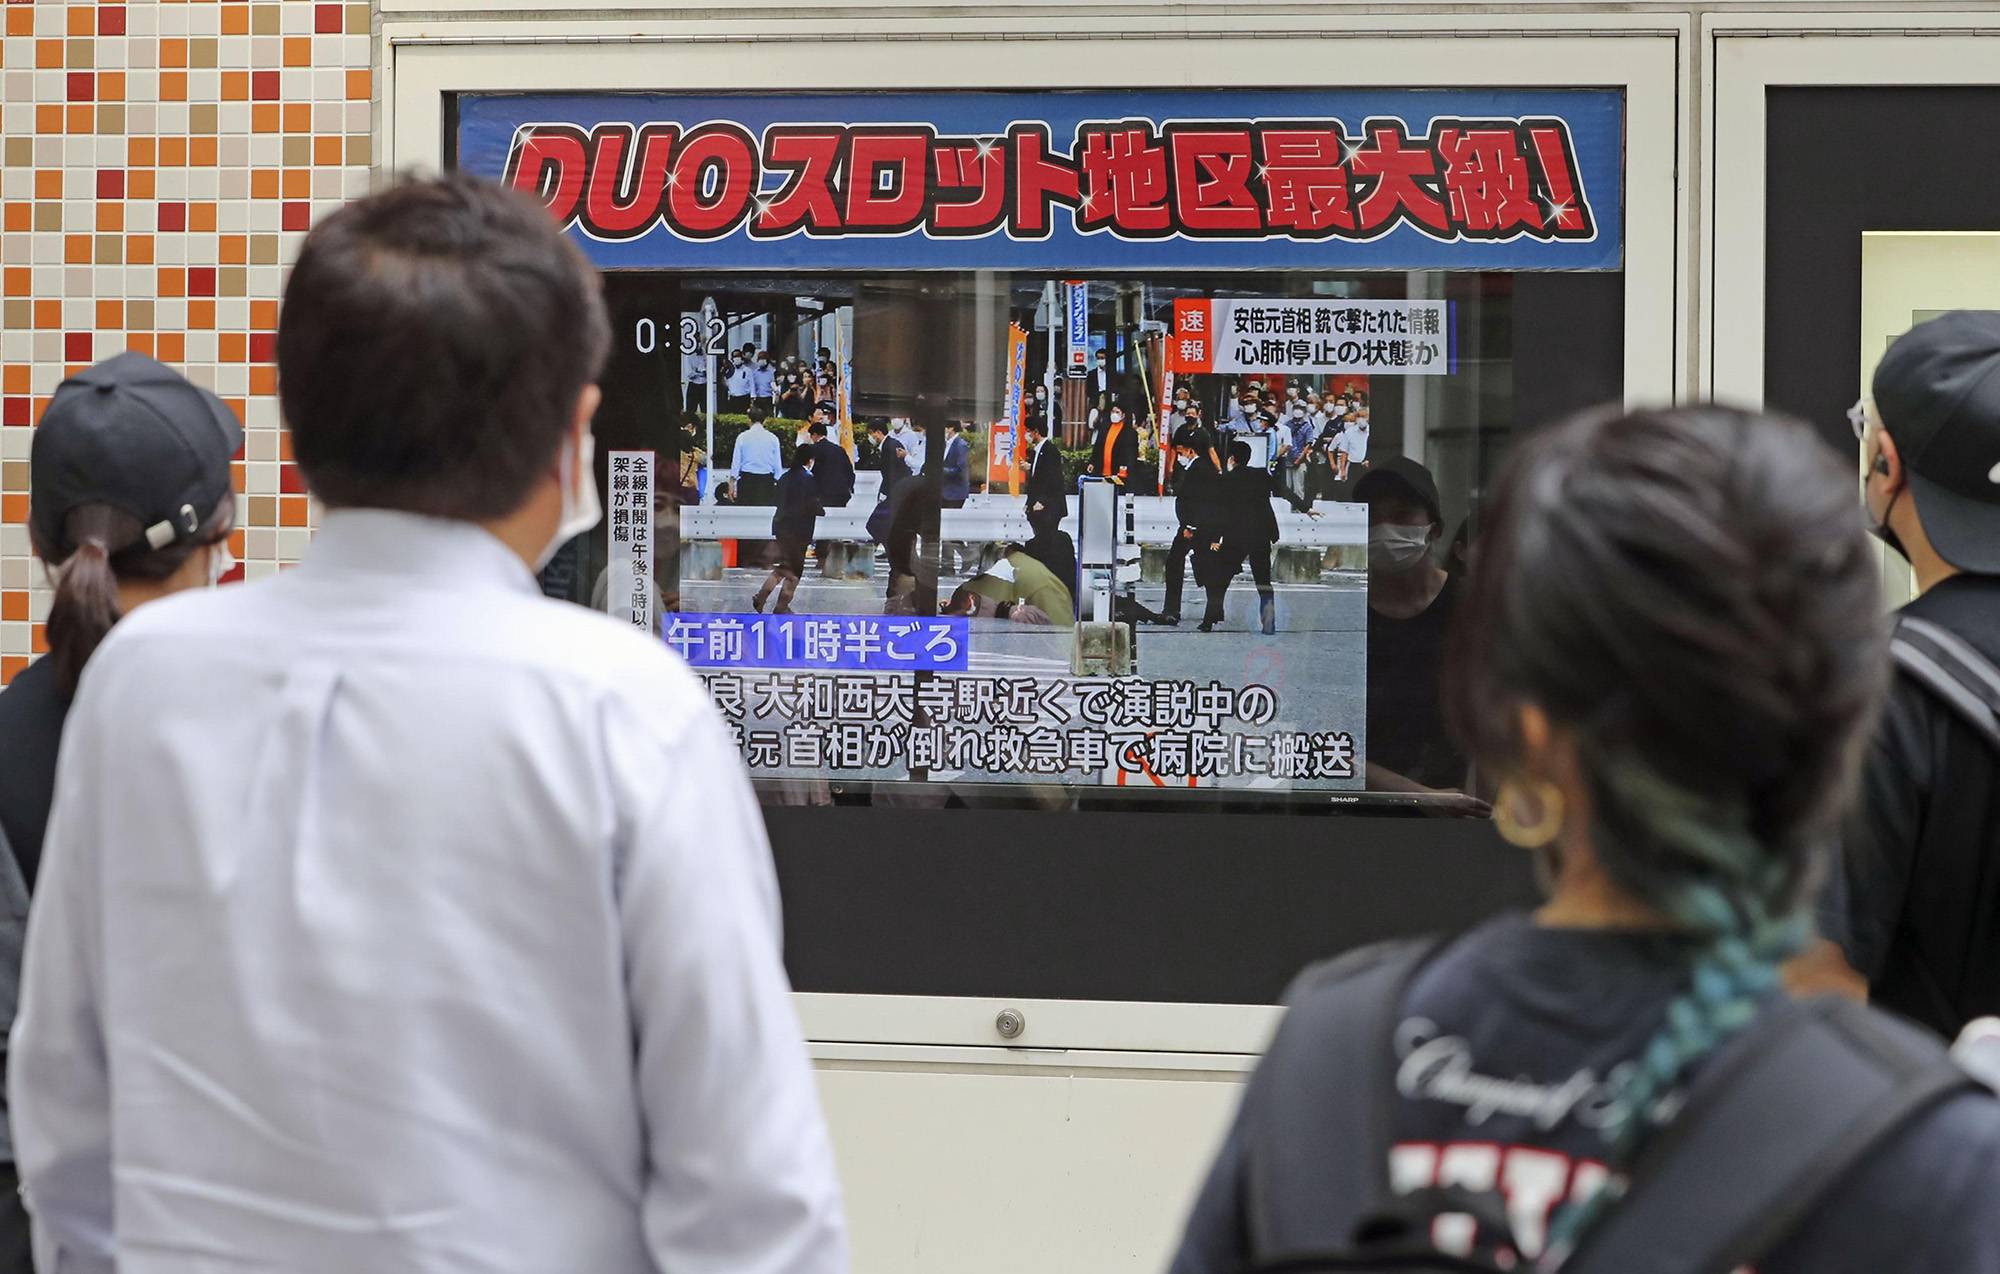 A television screen in Tokyo's Yurakucho area on July 8 shows the news that former Japanese Prime Minister Shinzo Abe has been shot.